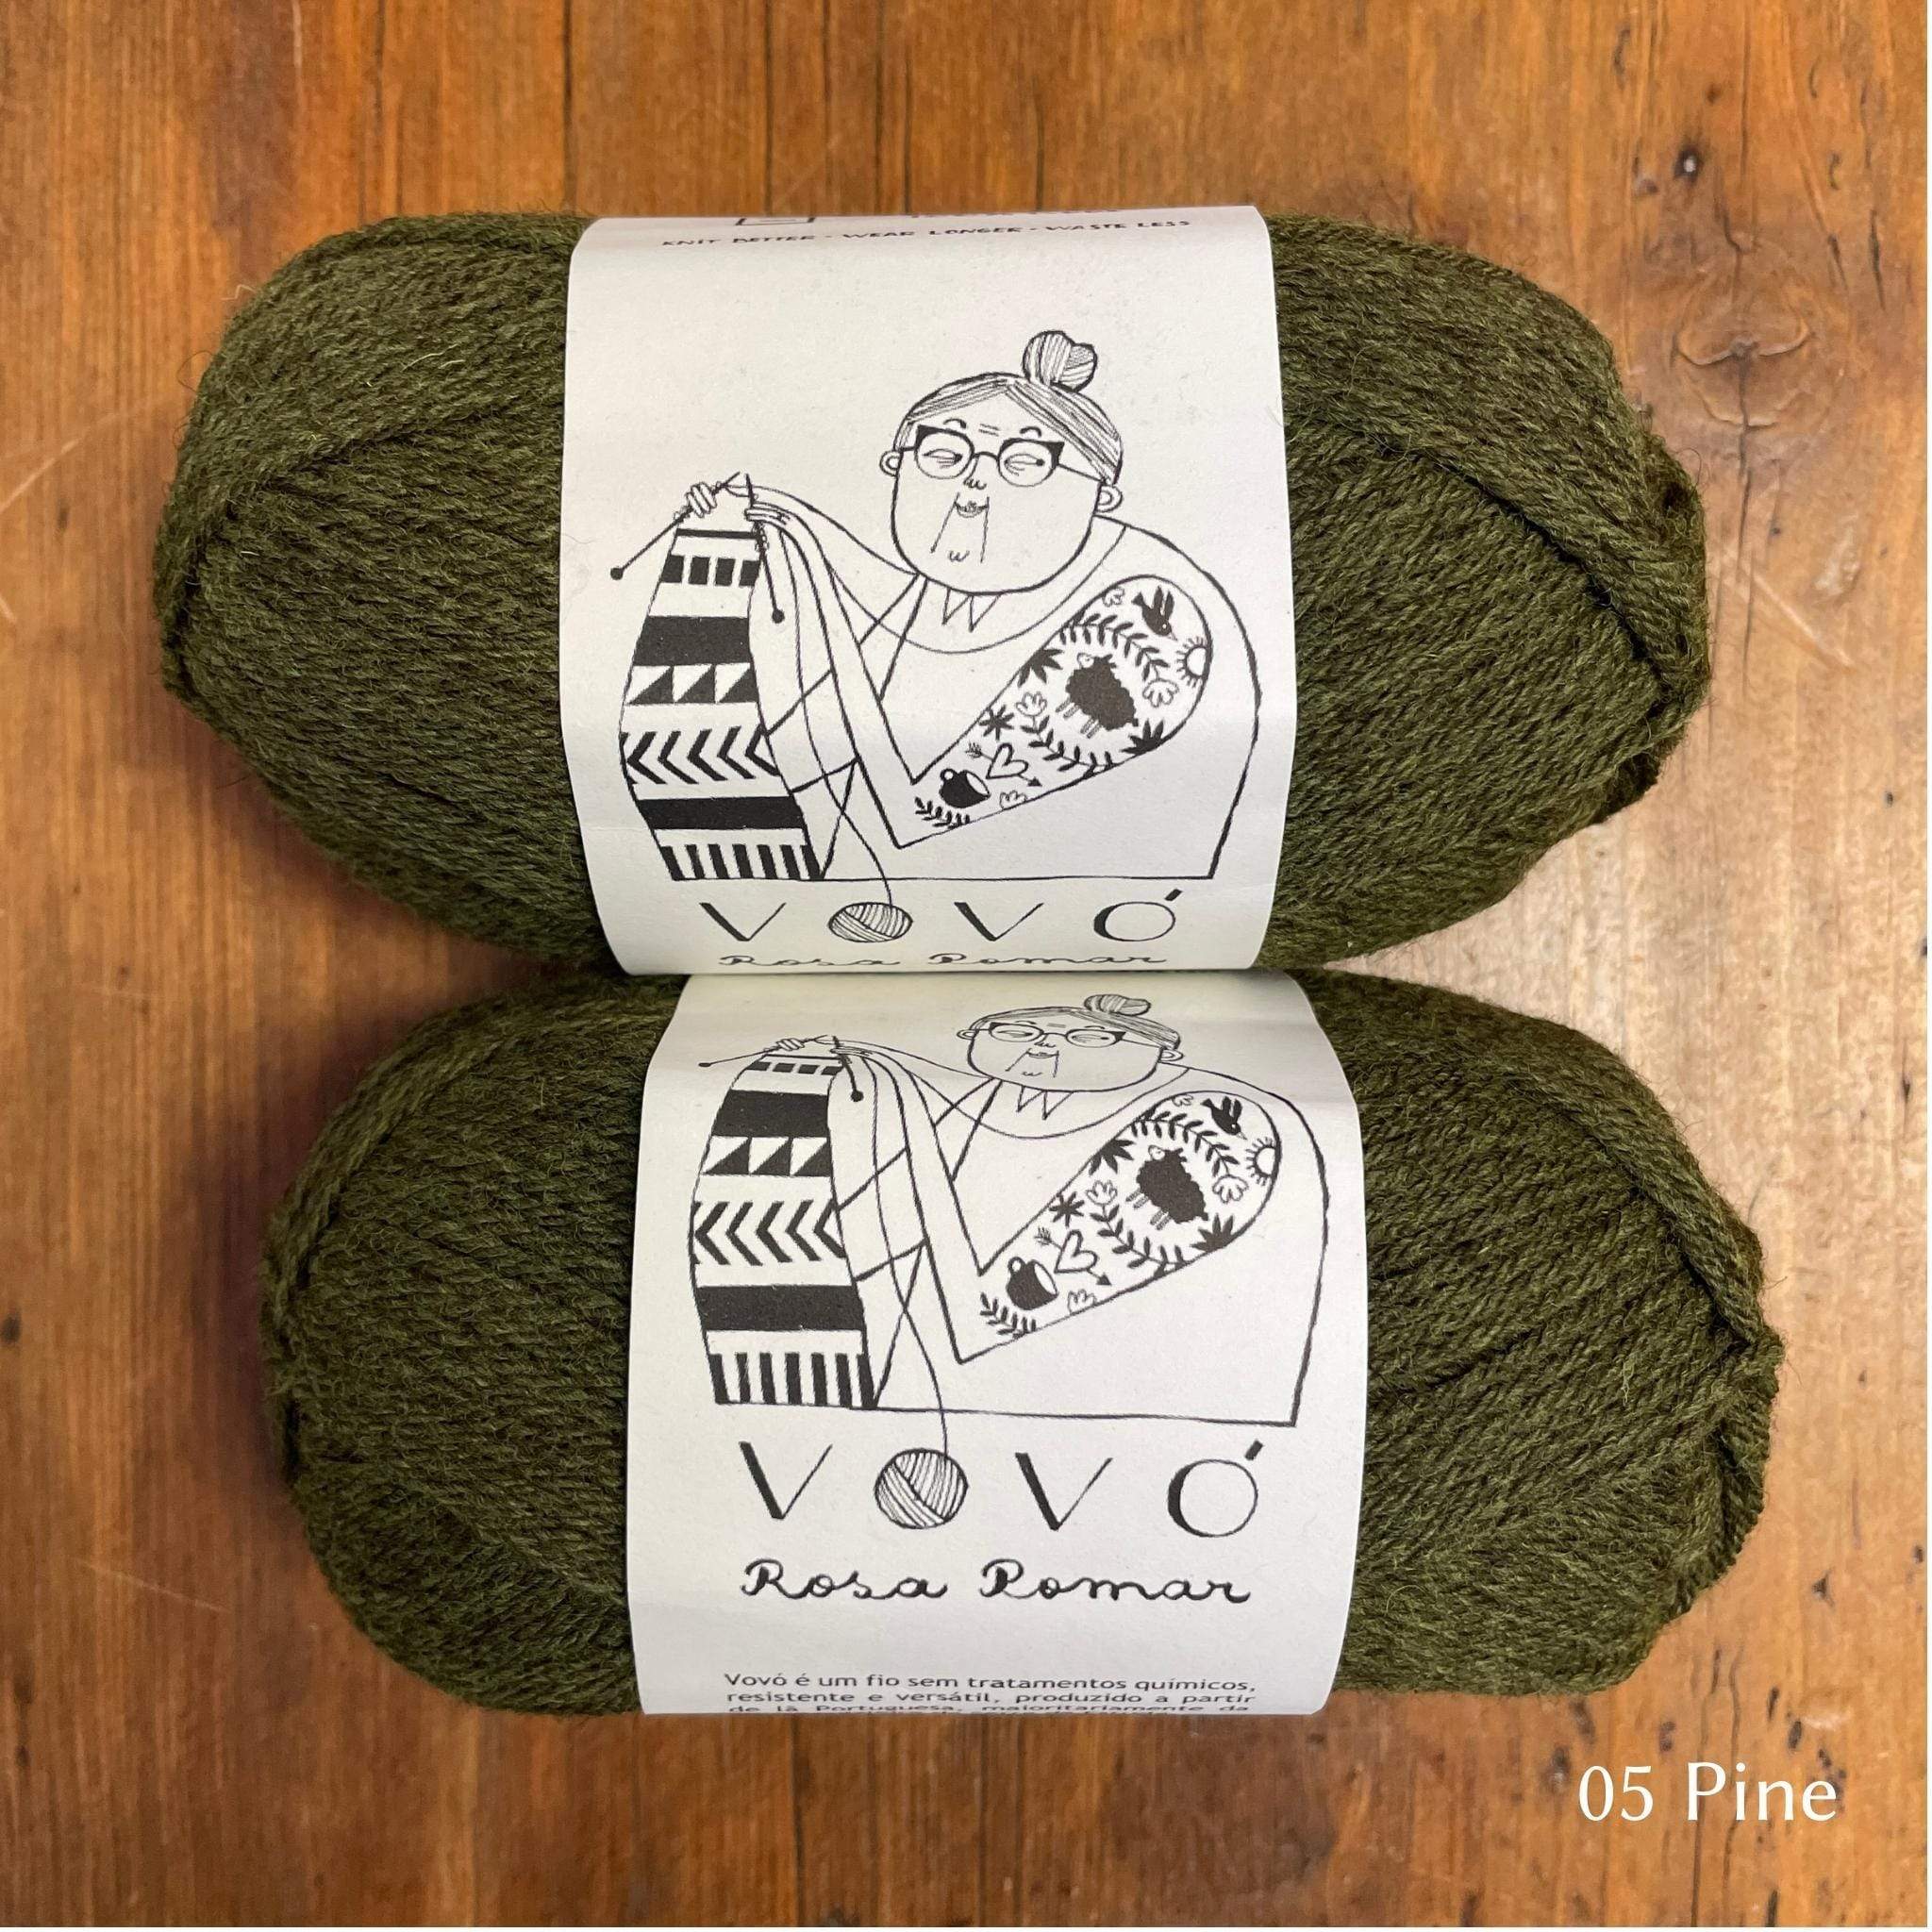 Retrosaria Vovo variant color 05 Pine, green with brown/gray undertone, showing label with grandmother knitting